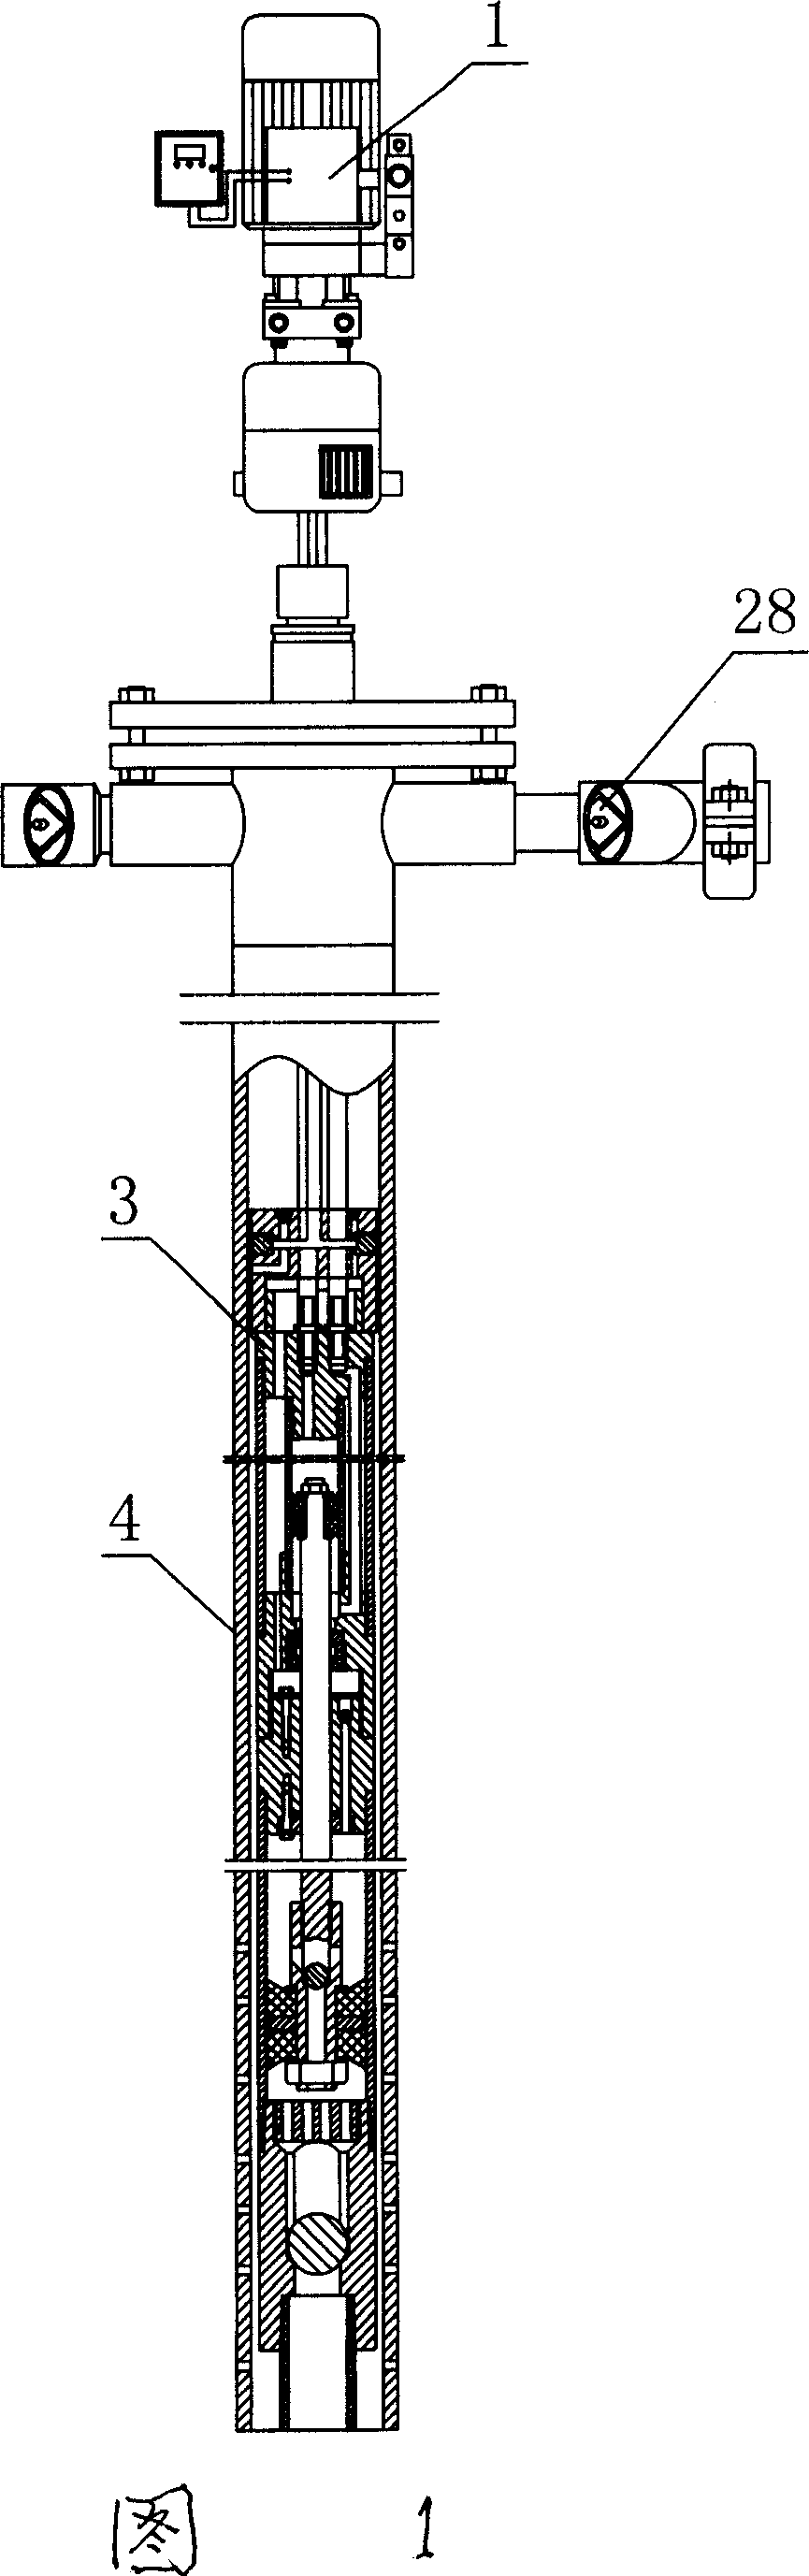 Intelligent hydraulic oil production well device